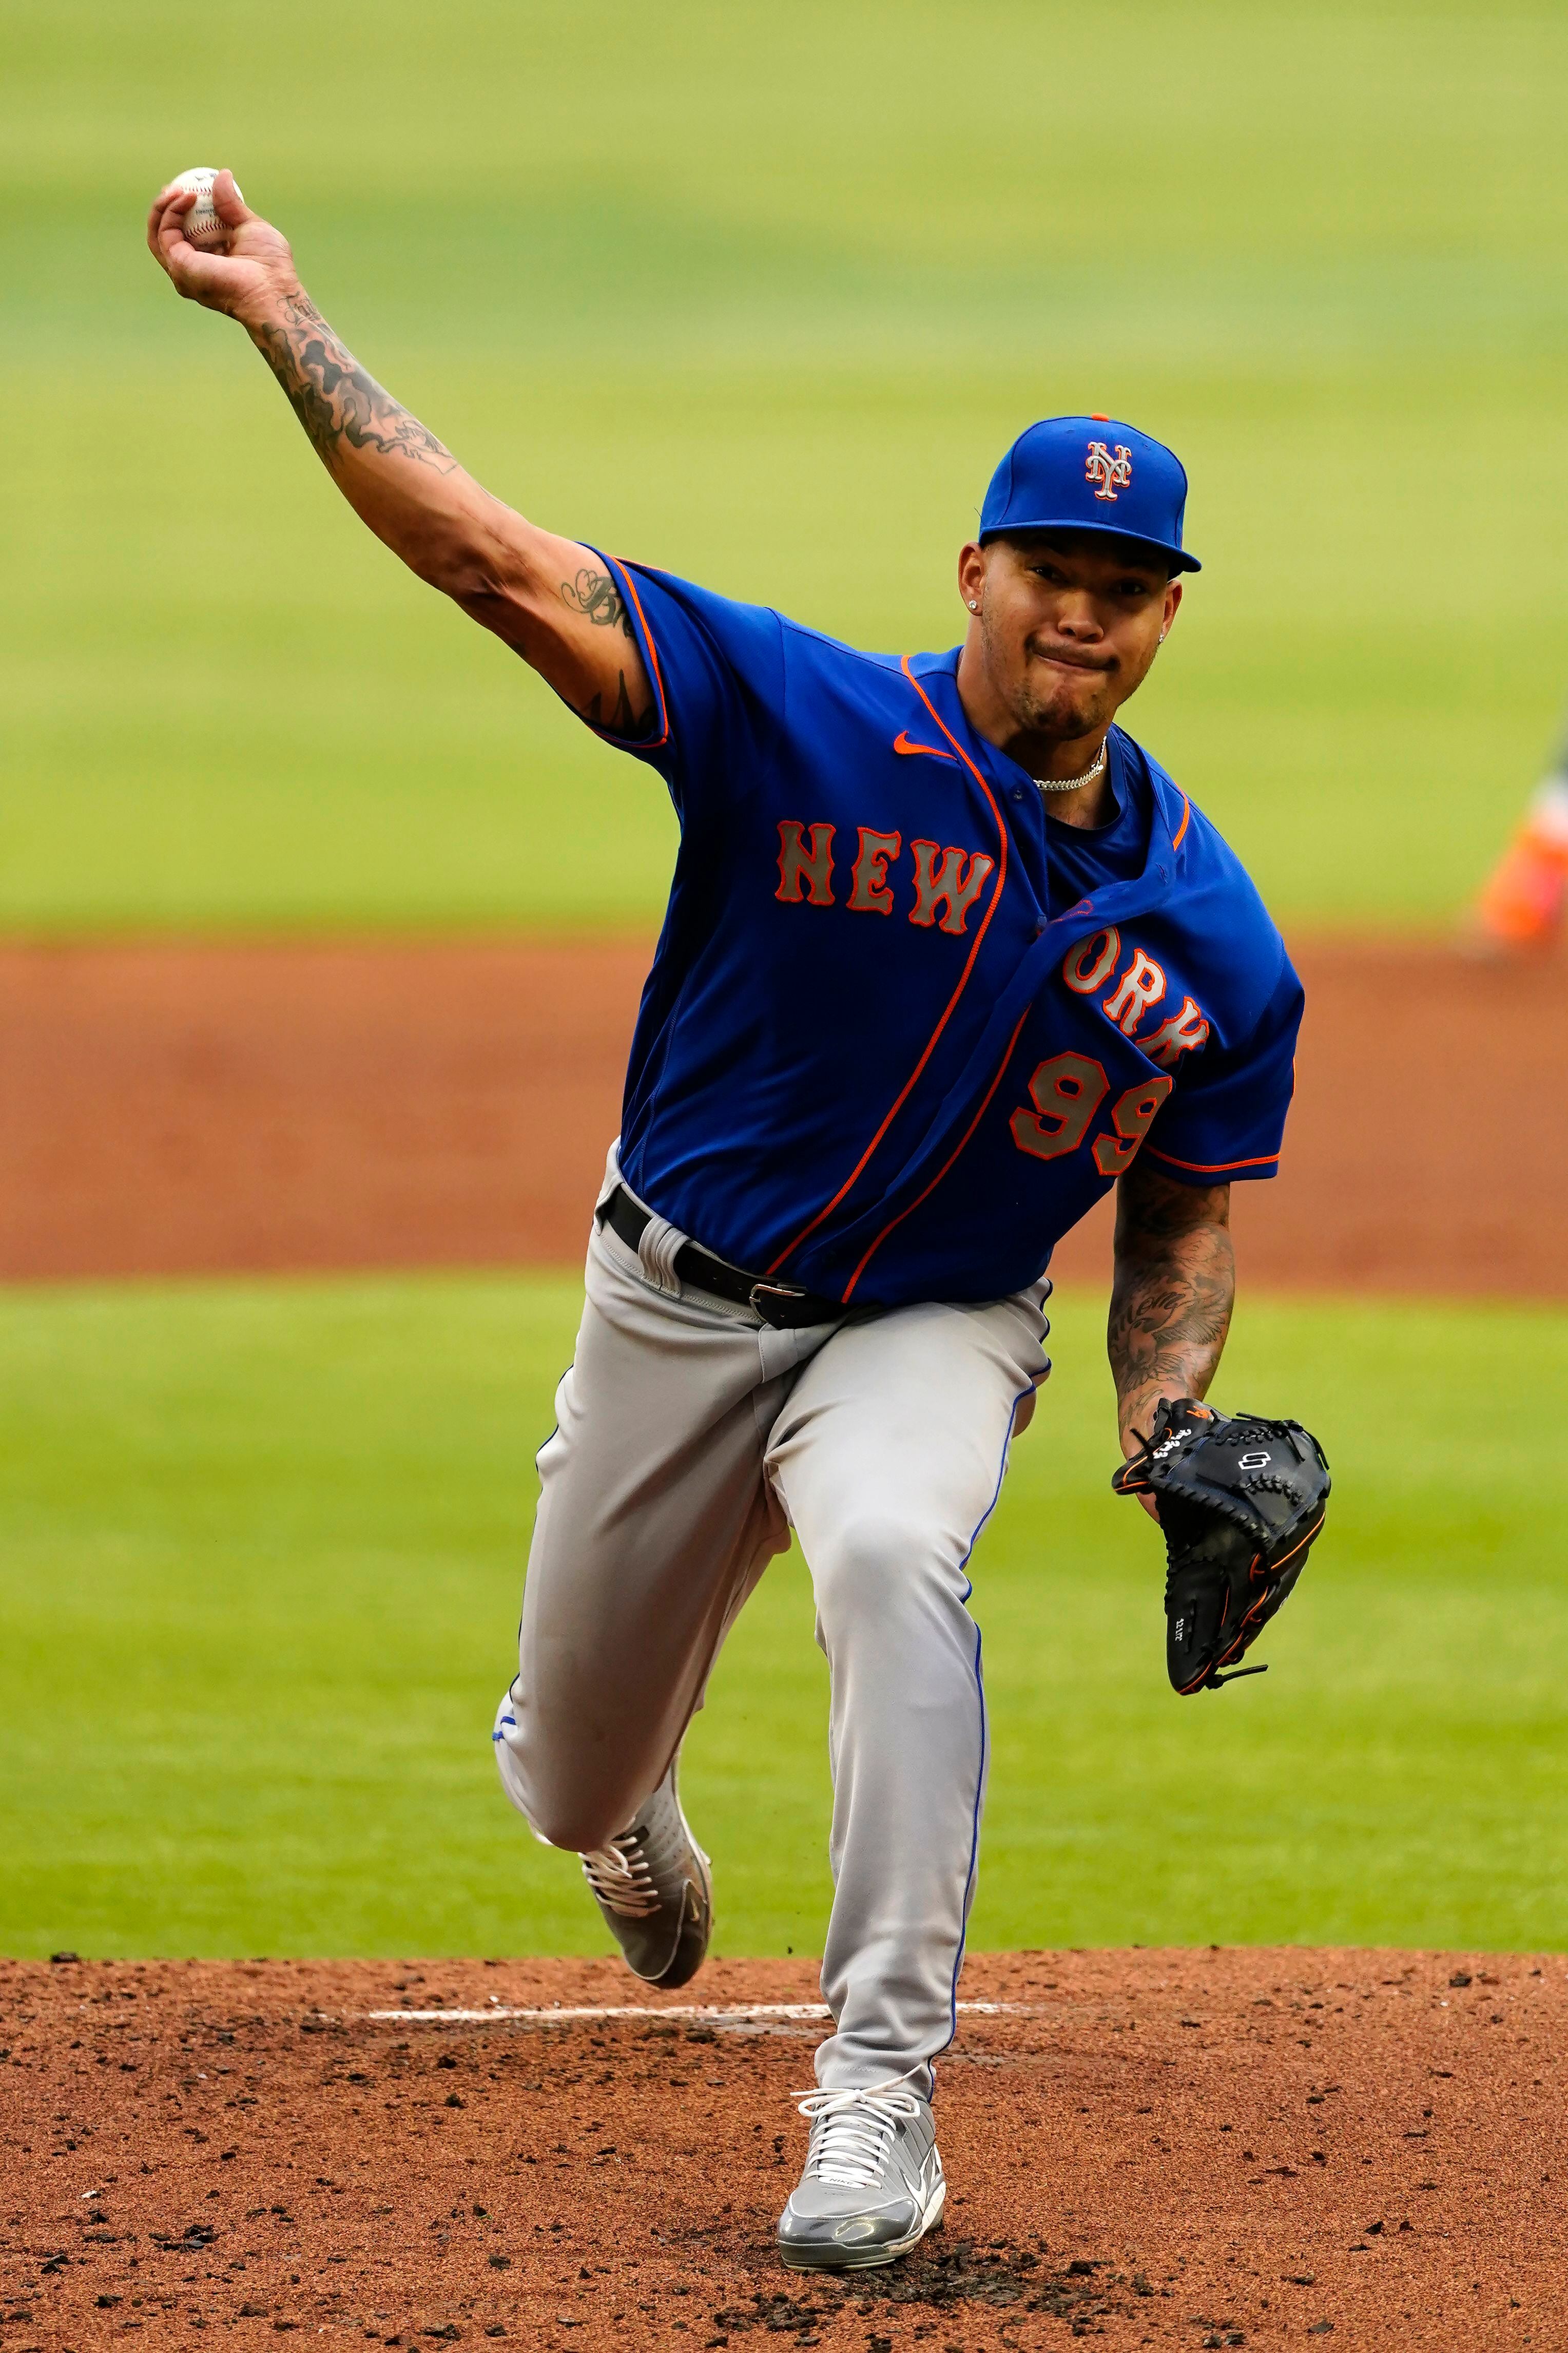 Mets' Pillar has multiple nasal fractures after hit by pitch – KTSM 9 News